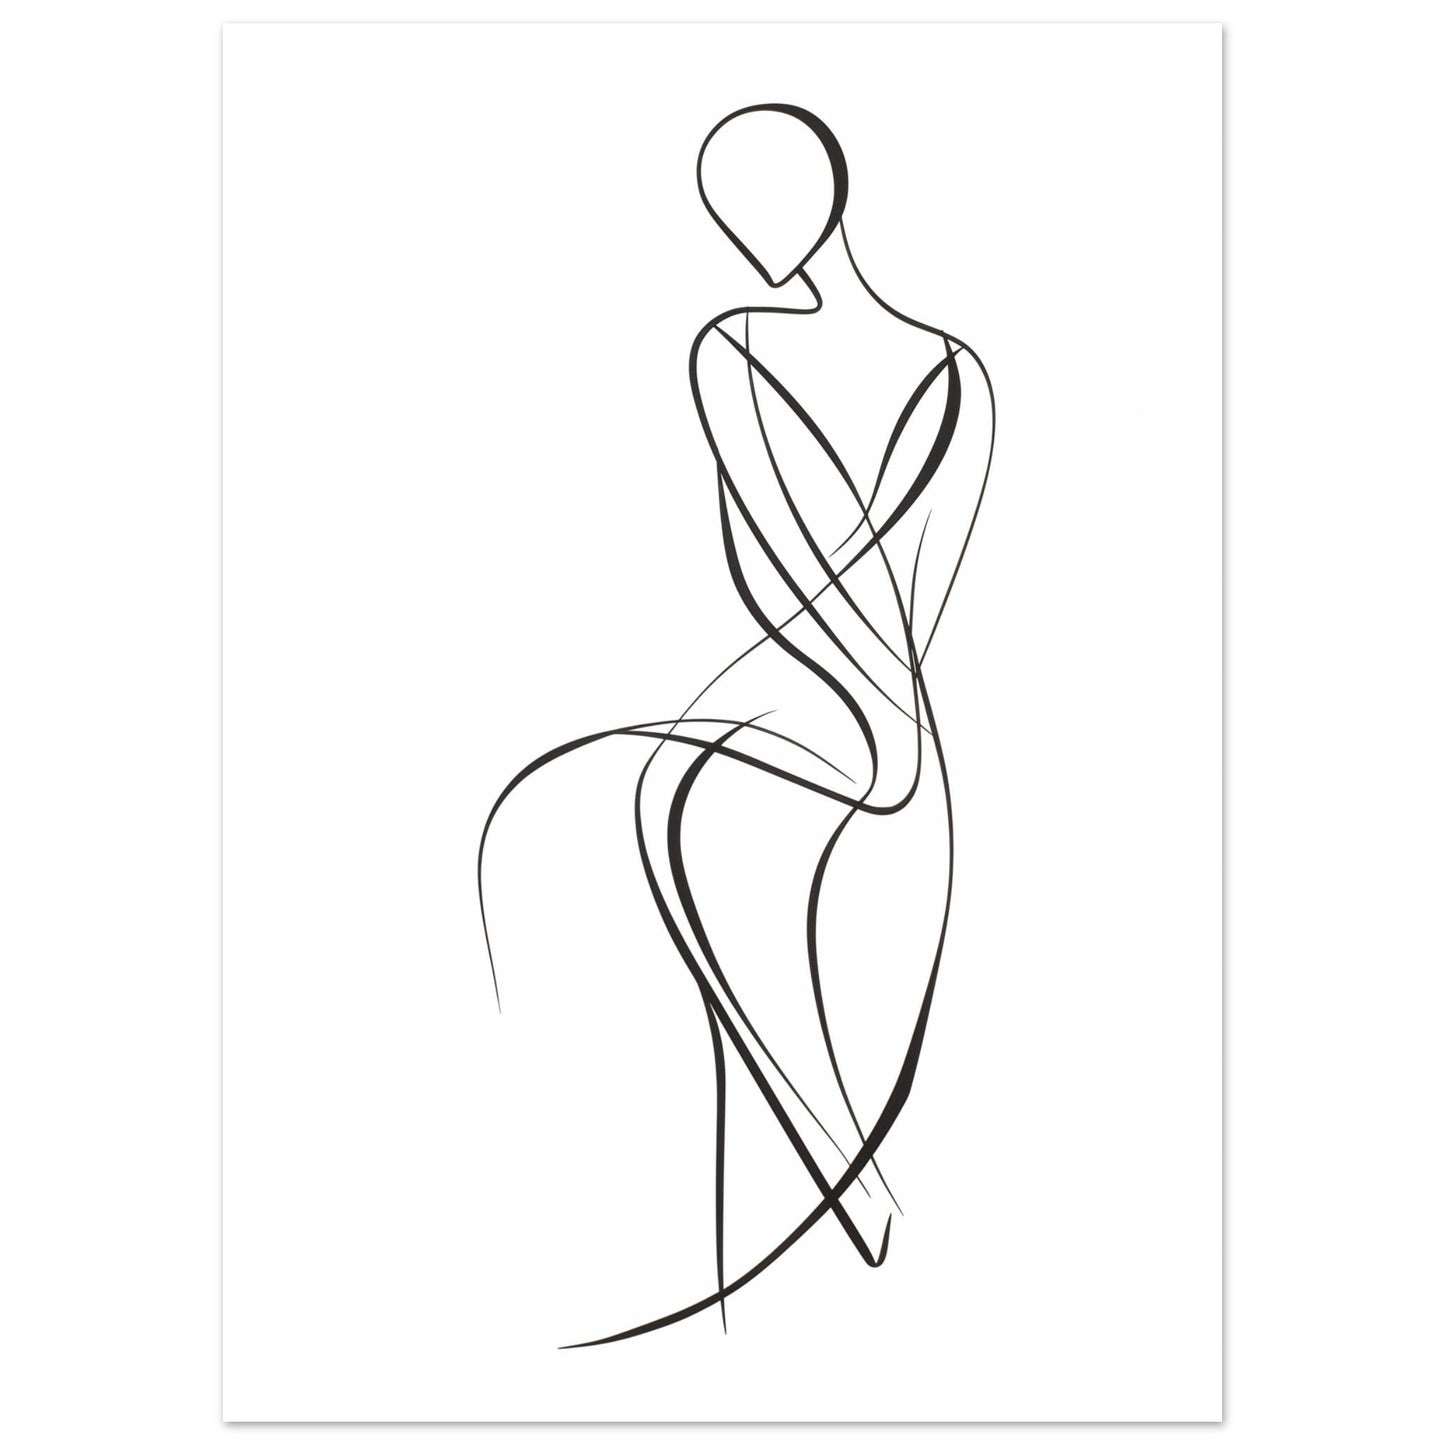 A black and white drawing of a woman's body, perfect for Essence of Elegance Wall Art or as a standout piece of Essence of Elegance Wall Art for any room.